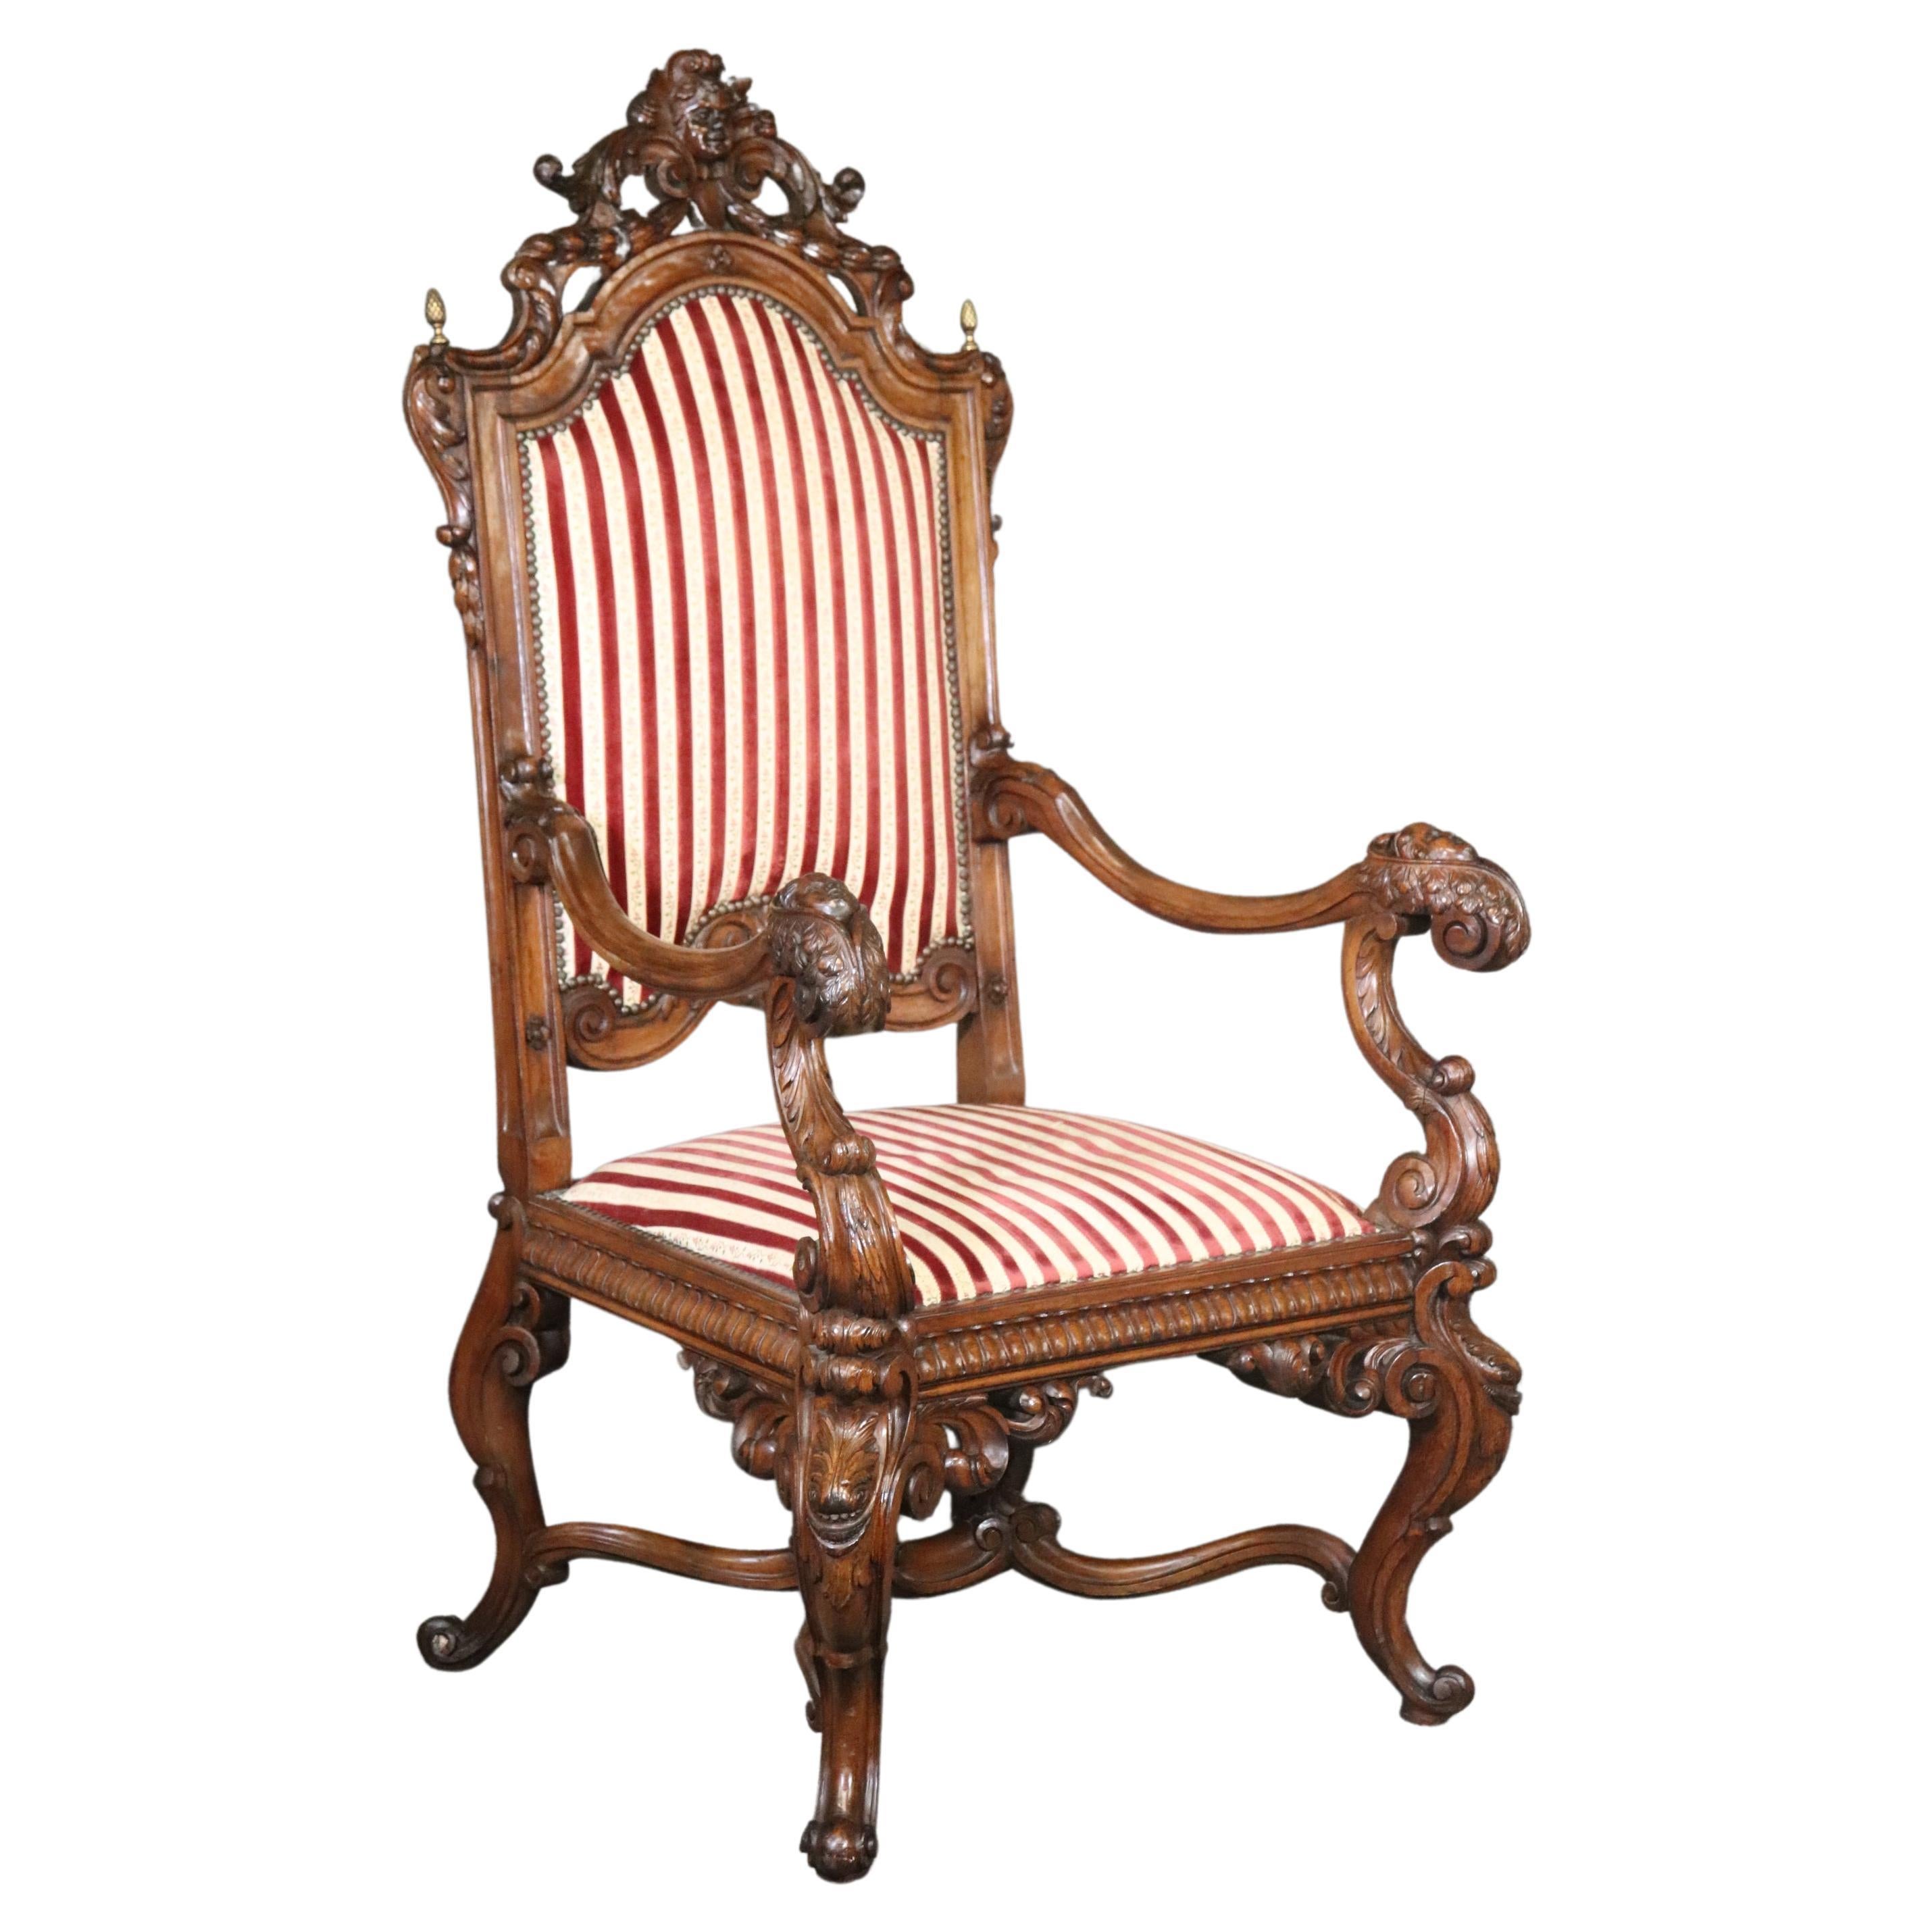 Large Heavily Carved Figural Victorian Walnut Throne Chair with Putti Cherubs  For Sale